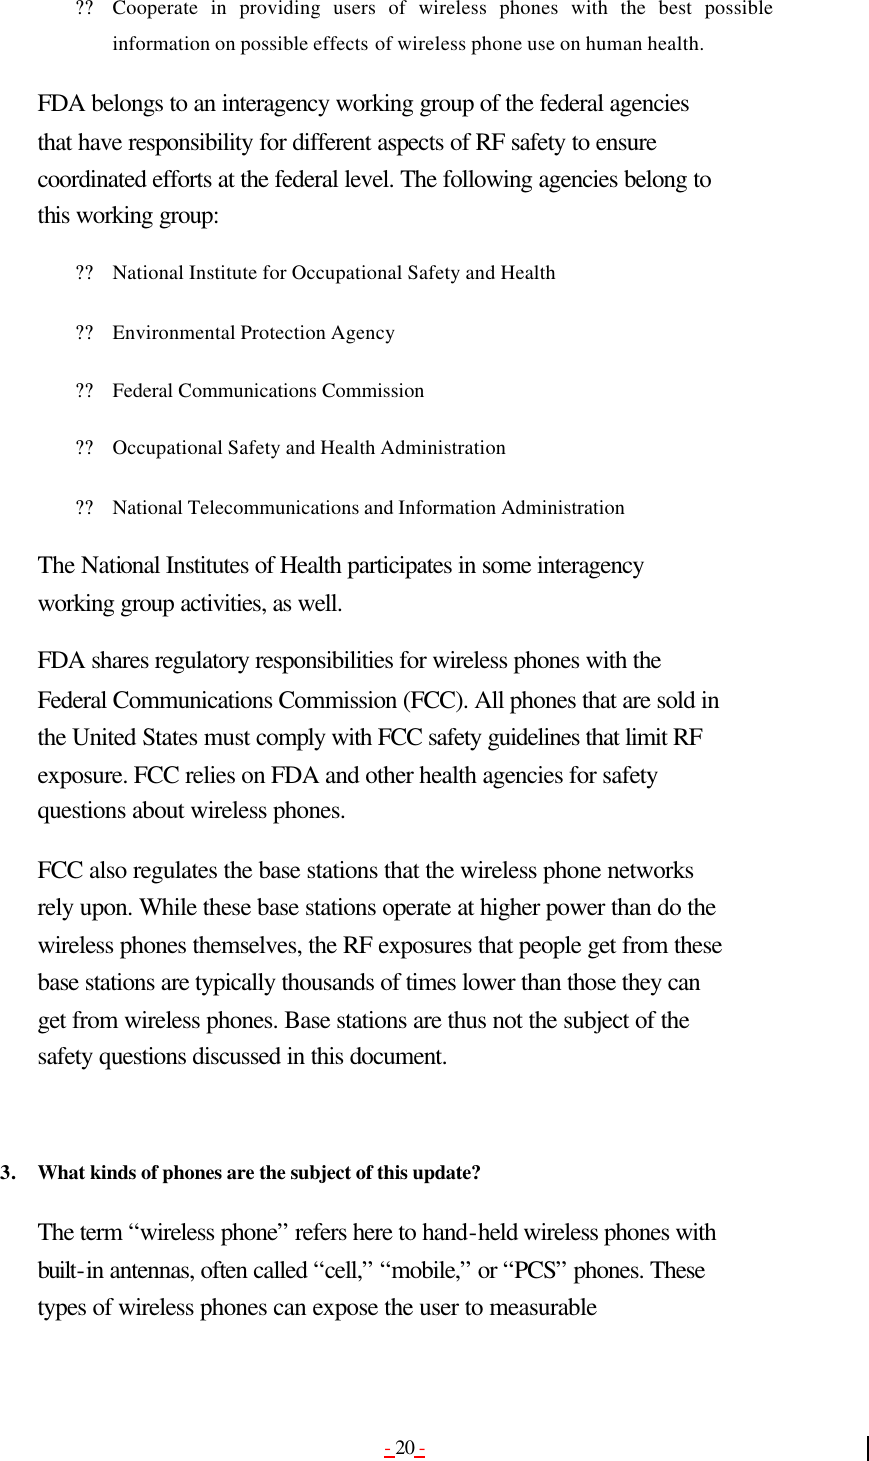 - 20 - ?? Cooperate in providing users of wireless phones with the best possible information on possible effects of wireless phone use on human health.   FDA belongs to an interagency working group of the federal agencies that have responsibility for different aspects of RF safety to ensure coordinated efforts at the federal level. The following agencies belong to this working group: ?? National Institute for Occupational Safety and Health   ?? Environmental Protection Agency   ?? Federal Communications Commission   ?? Occupational Safety and Health Administration   ?? National Telecommunications and Information Administration   The National Institutes of Health participates in some interagency working group activities, as well. FDA shares regulatory responsibilities for wireless phones with the Federal Communications Commission (FCC). All phones that are sold in the United States must comply with FCC safety guidelines that limit RF exposure. FCC relies on FDA and other health agencies for safety questions about wireless phones. FCC also regulates the base stations that the wireless phone networks rely upon. While these base stations operate at higher power than do the wireless phones themselves, the RF exposures that people get from these base stations are typically thousands of times lower than those they can get from wireless phones. Base stations are thus not the subject of the safety questions discussed in this document.   3. What kinds of phones are the subject of this update?  The term “wireless phone” refers here to hand-held wireless phones with built-in antennas, often called “cell,” “mobile,” or “PCS” phones. These types of wireless phones can expose the user to measurable 